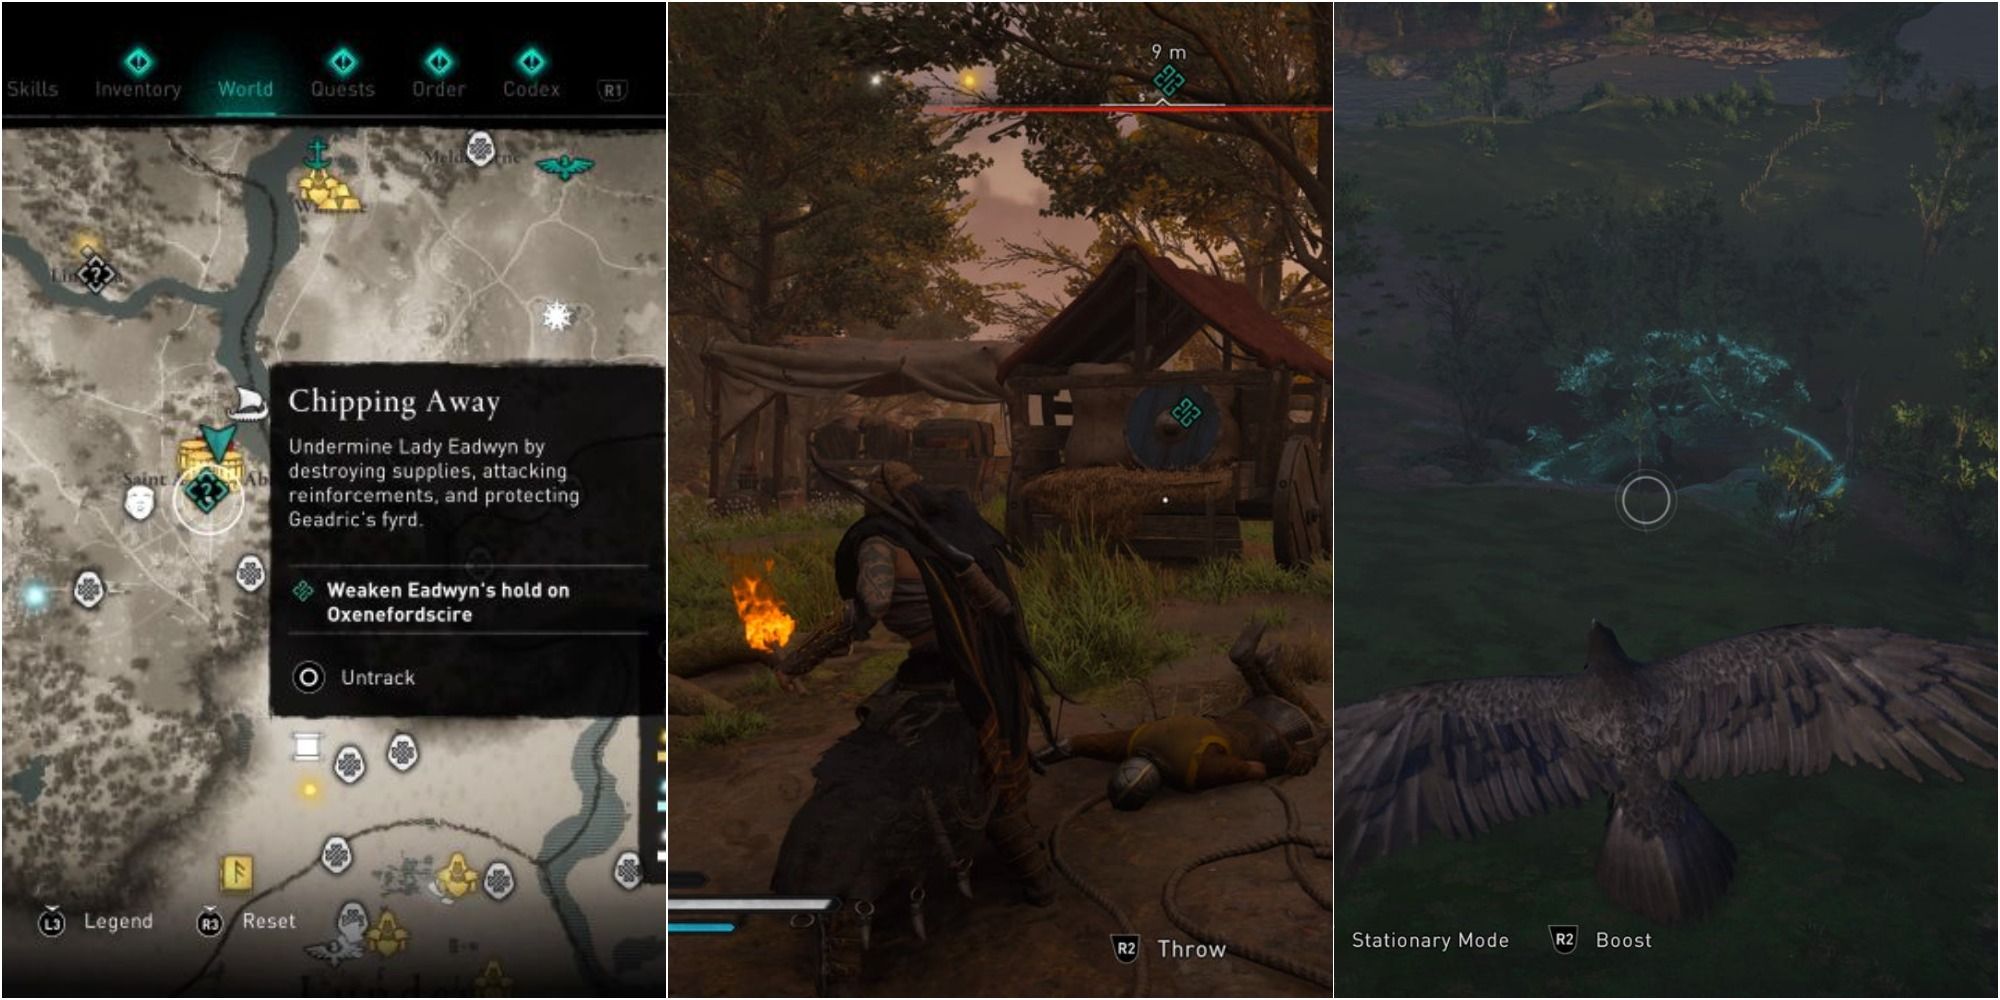 Split image of Oxenefordscire chipping away quest, Eivor with supply crate, raven in Assassin's Creed Valhalla